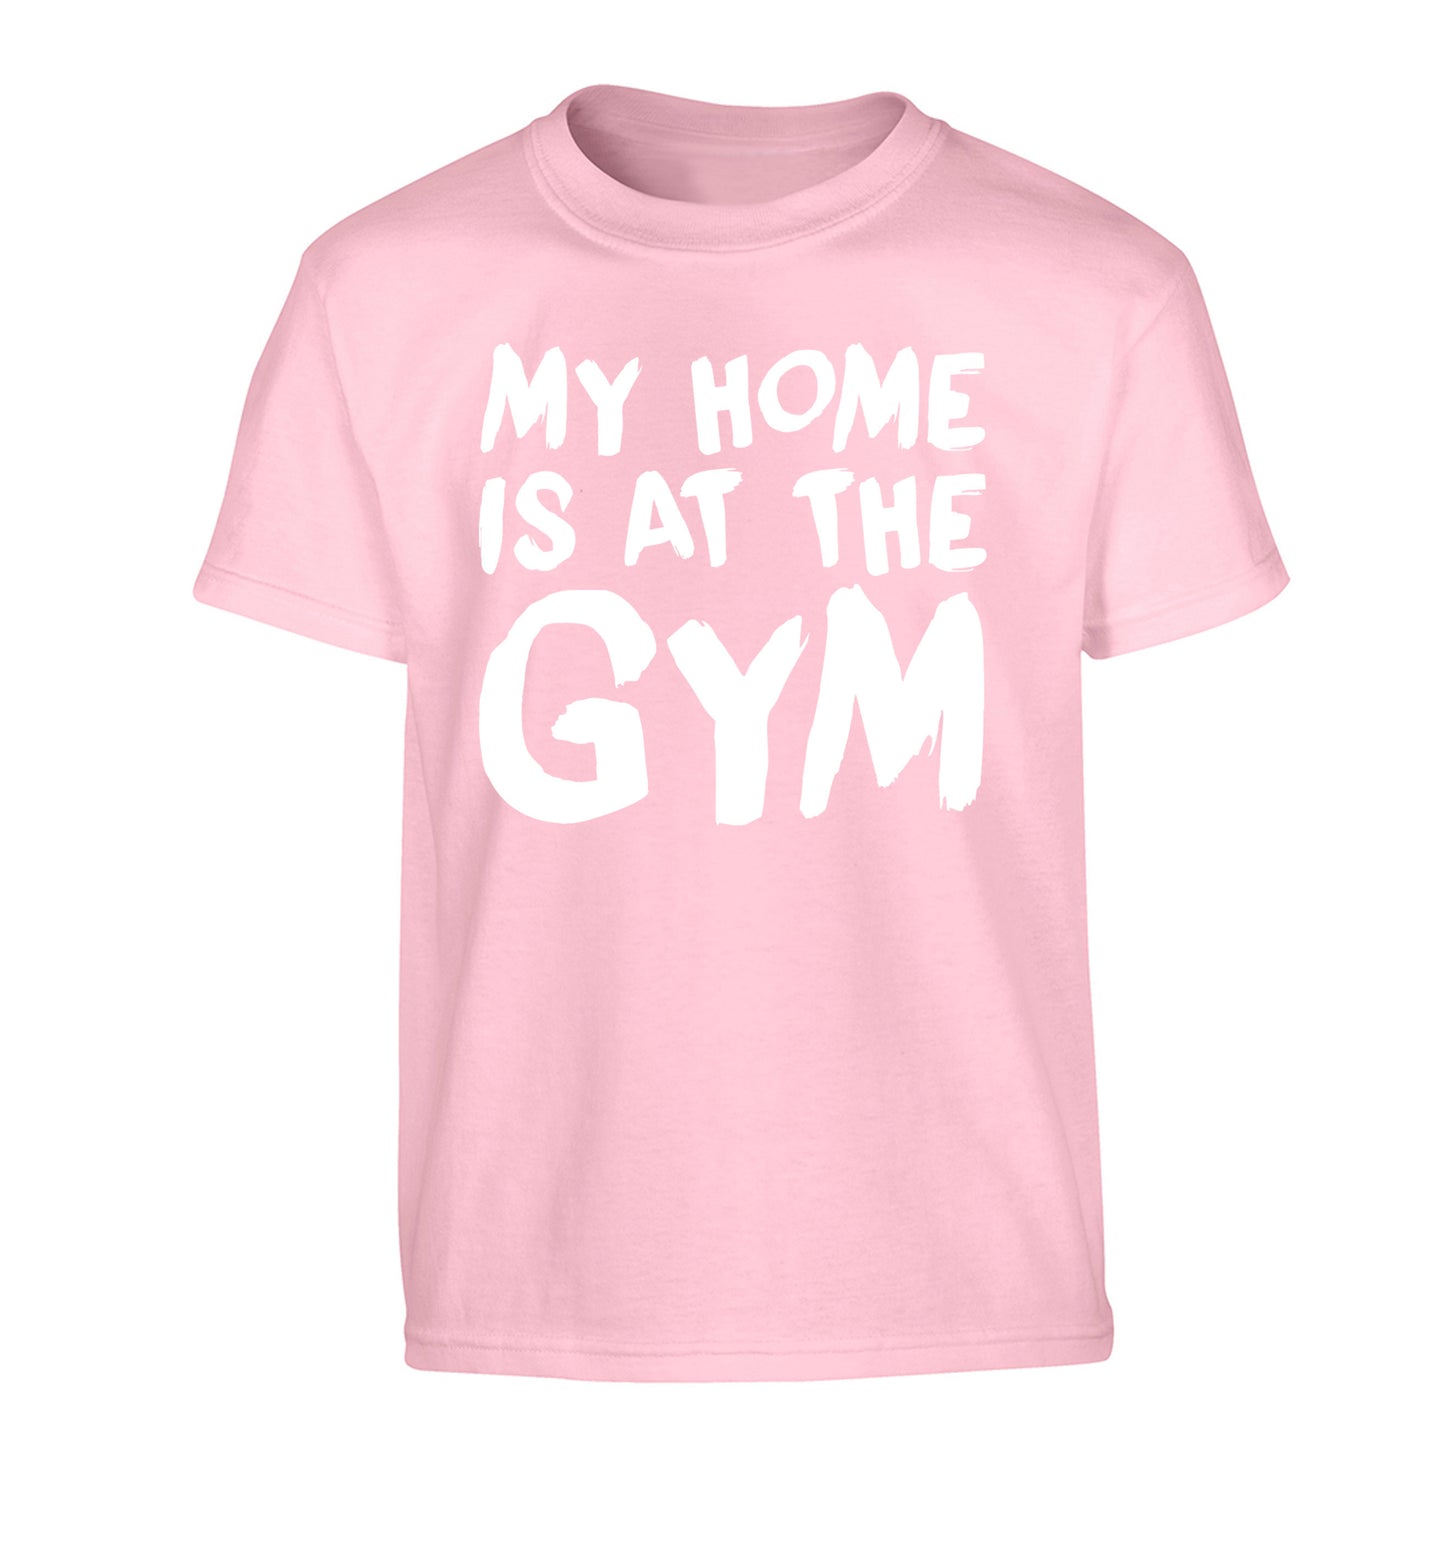 My home is at the gym Children's light pink Tshirt 12-14 Years